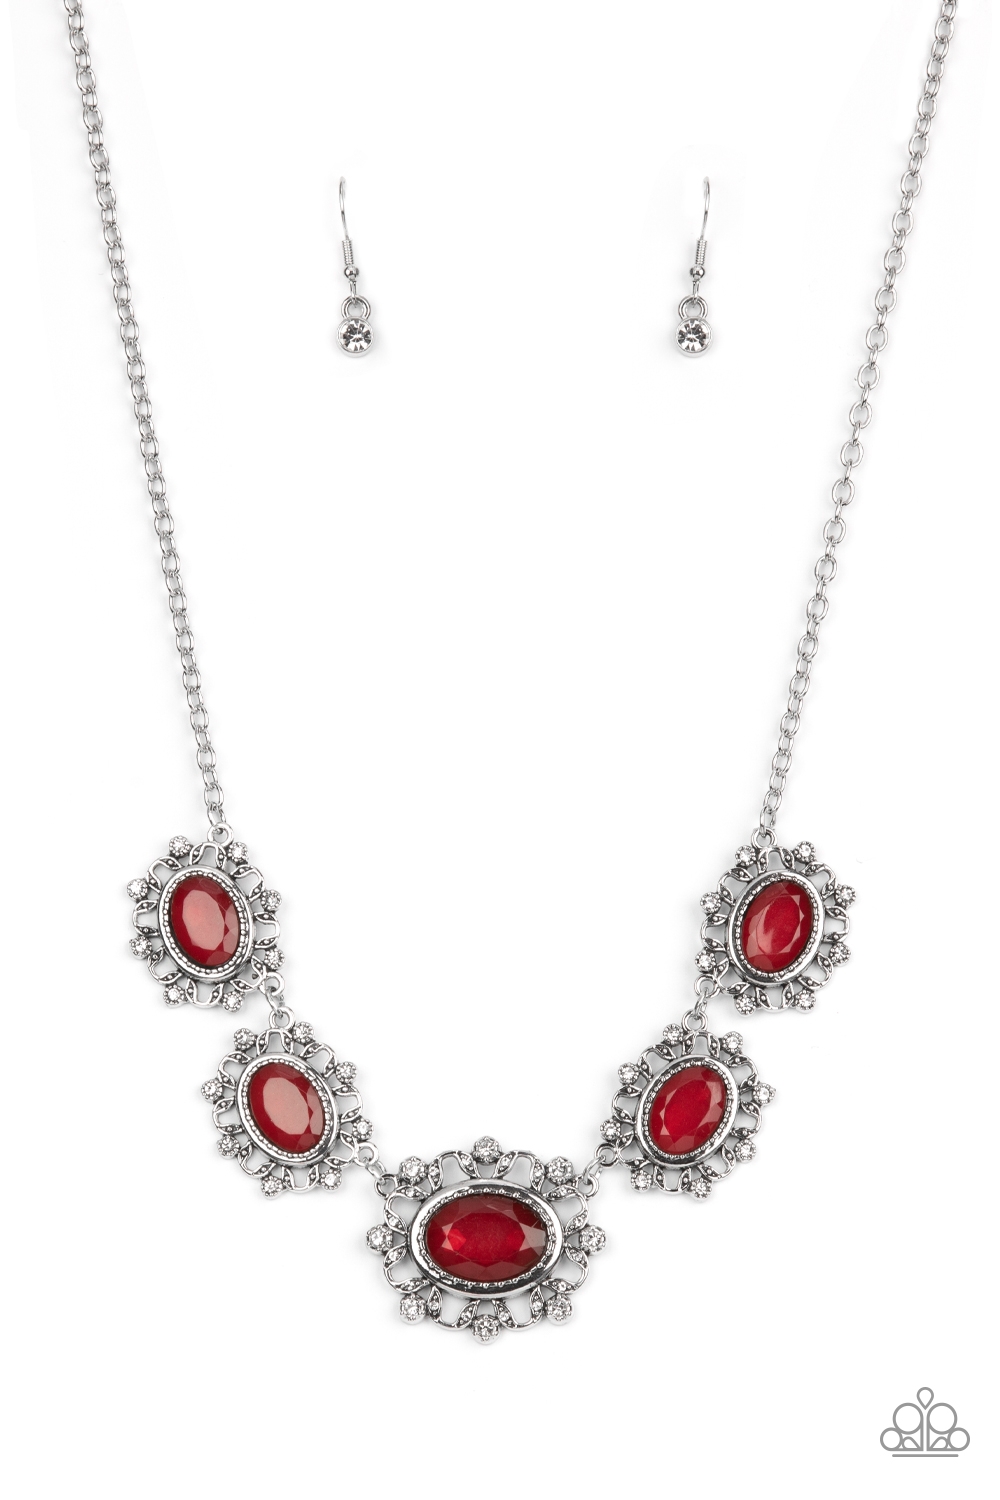 Necklace - Meadow Wedding - Red